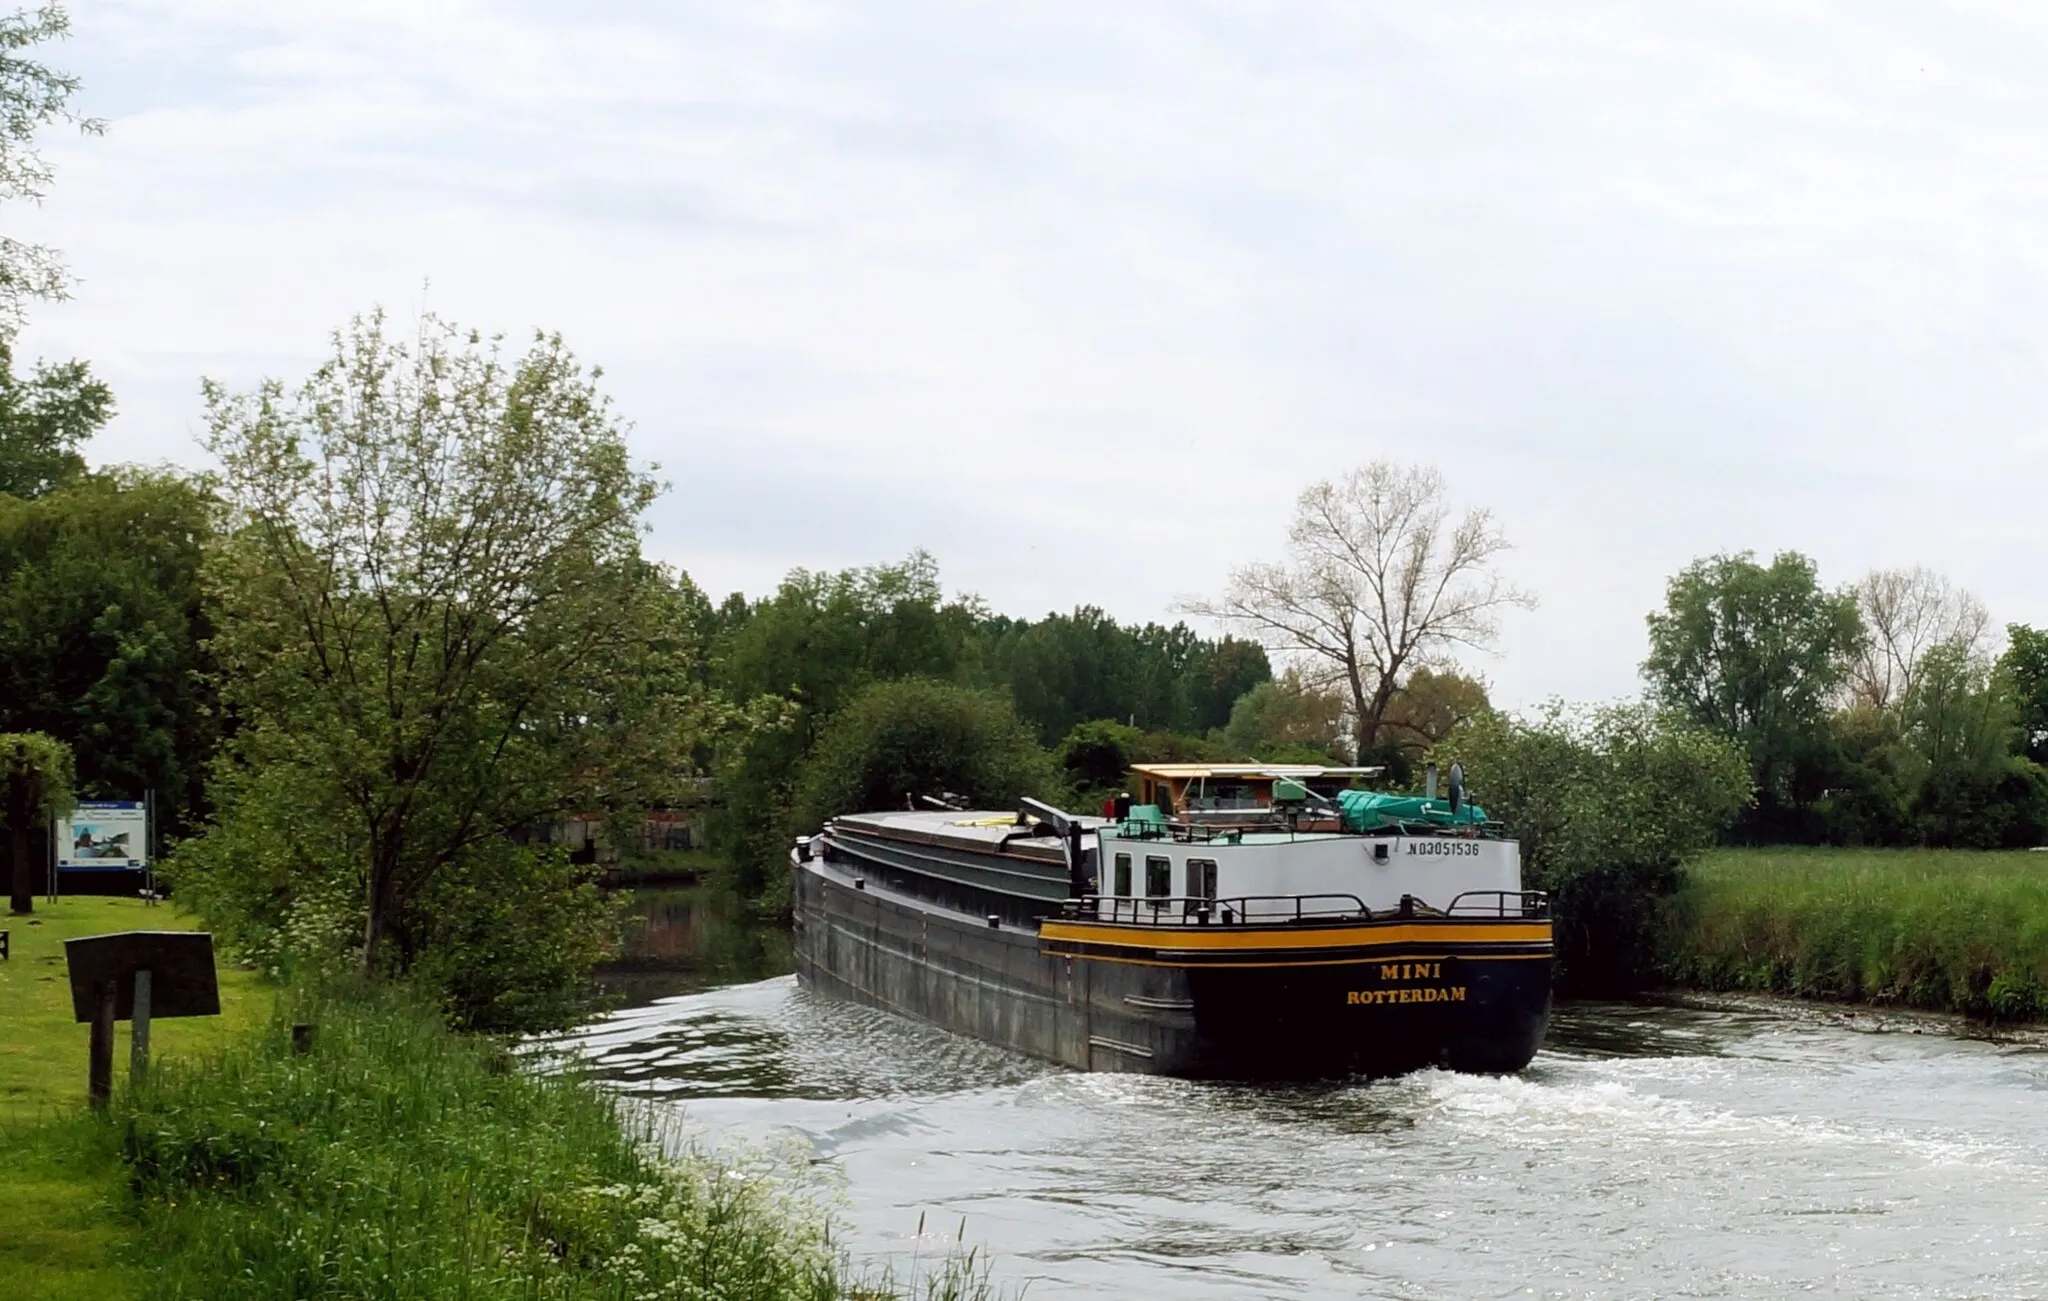 Photo showing: Mini - GMS (Barge) - ENI 03051536 on the Lys River in Sailly-sur-la-Lys